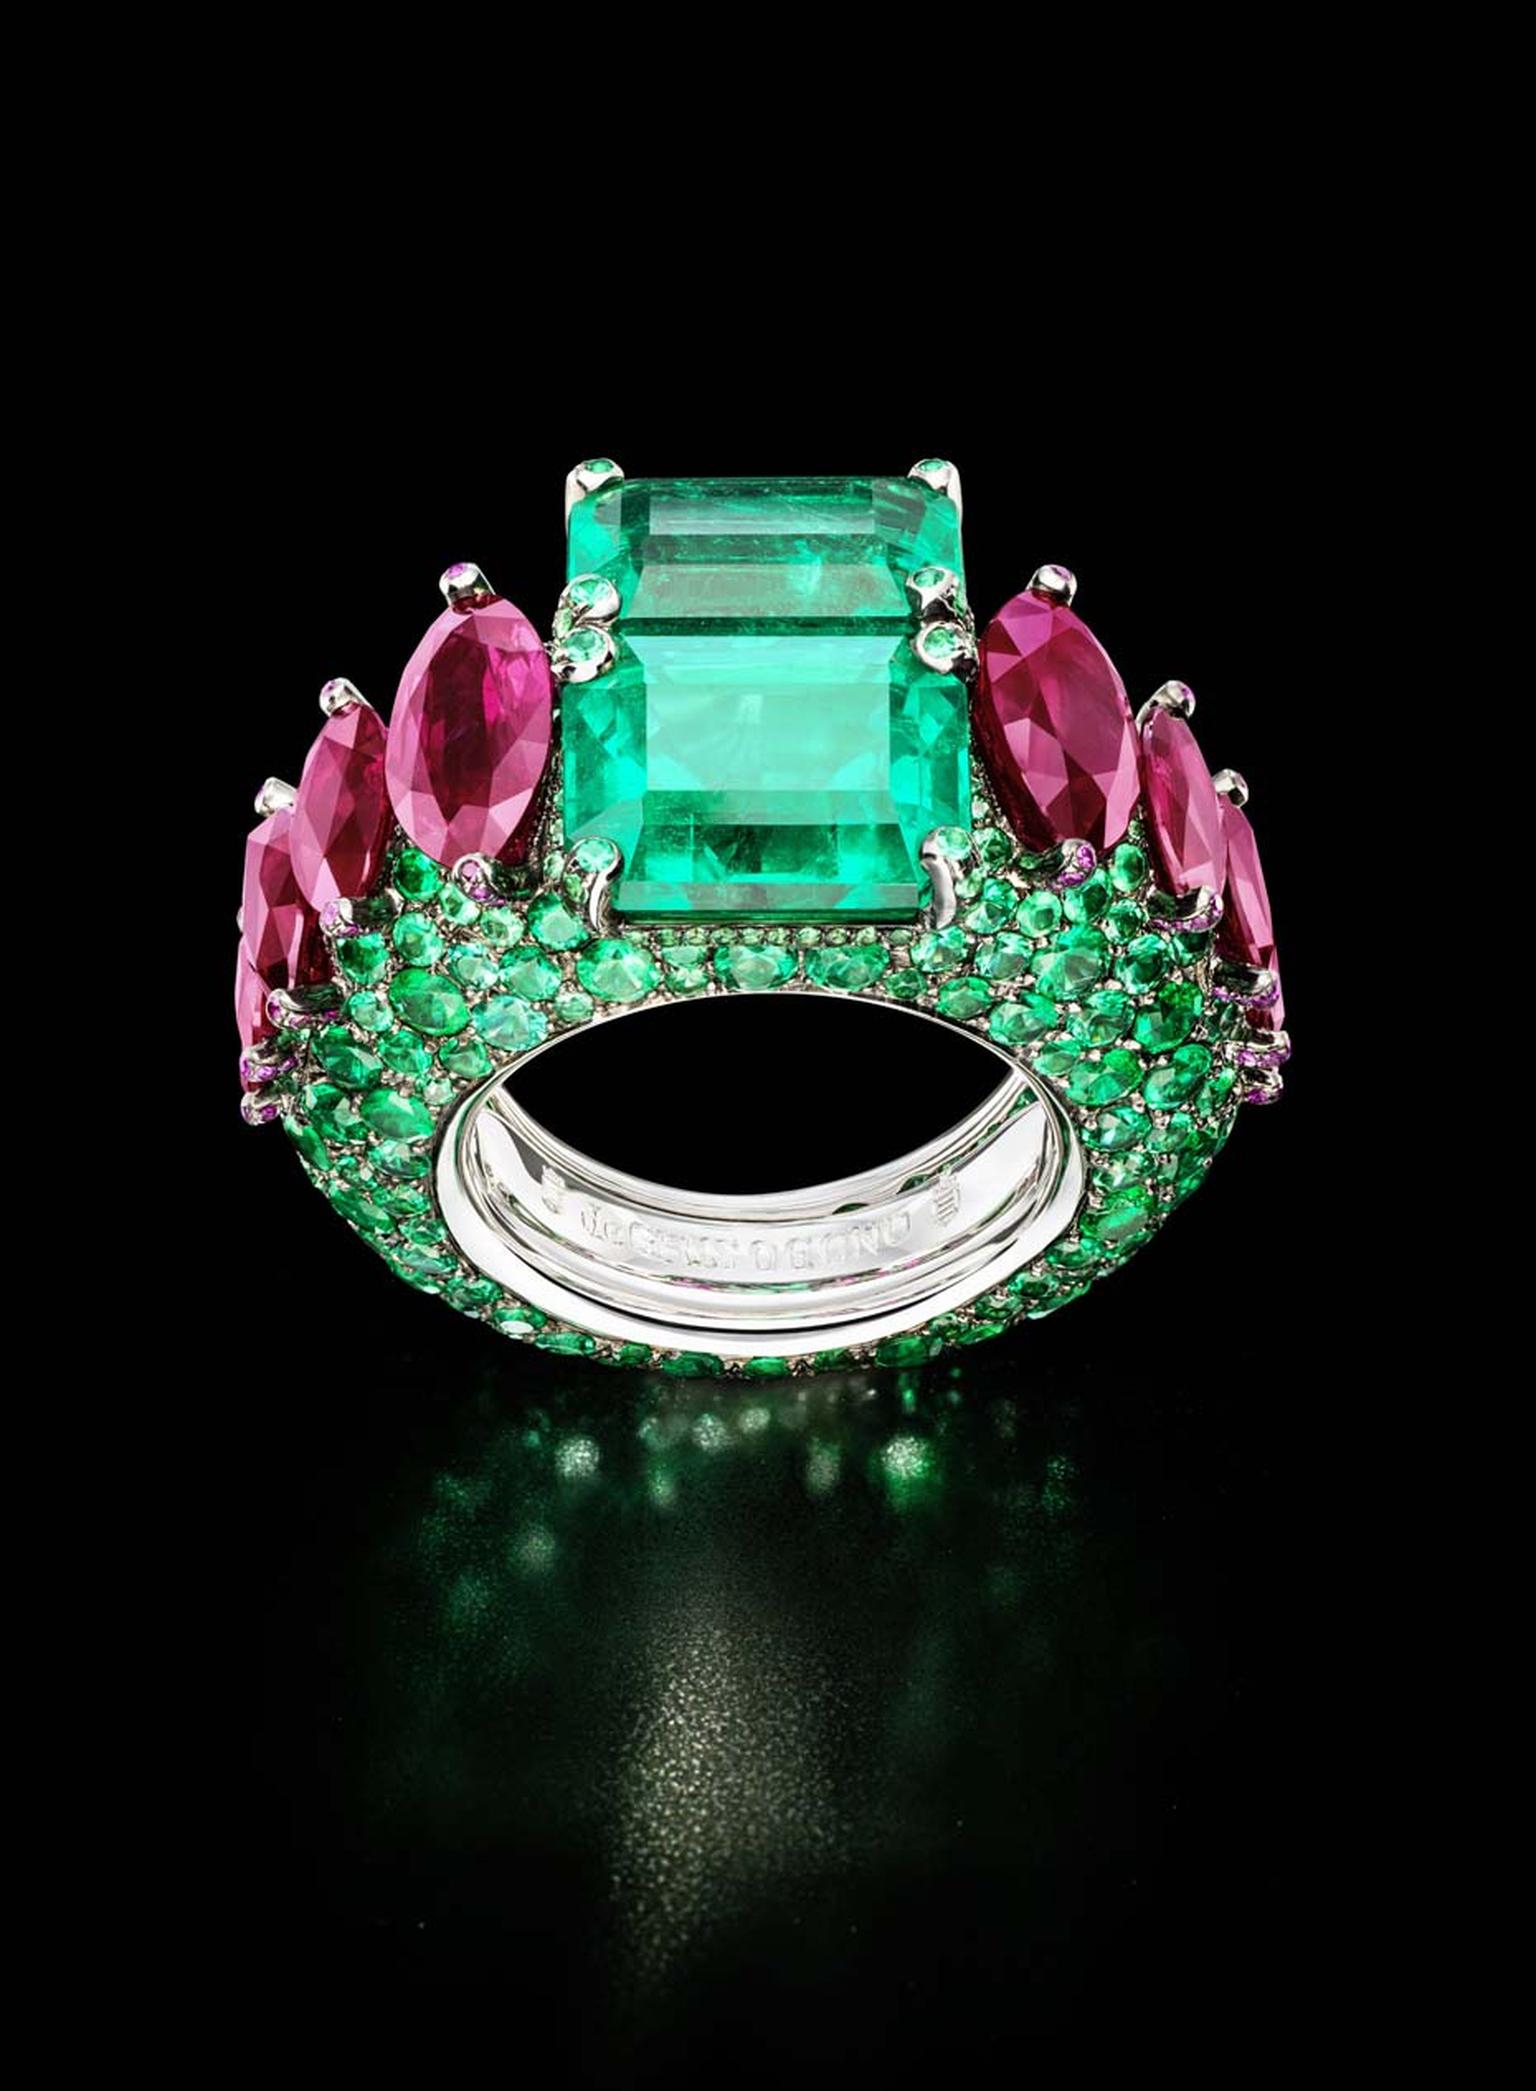 The de GRISOGONO white gold ring featuring two cushion-cut emeralds, 320 brilliant-cut emeralds and 79 rubies, as worn by Sharon Stone at de GRISOGONO's Eden Roc party